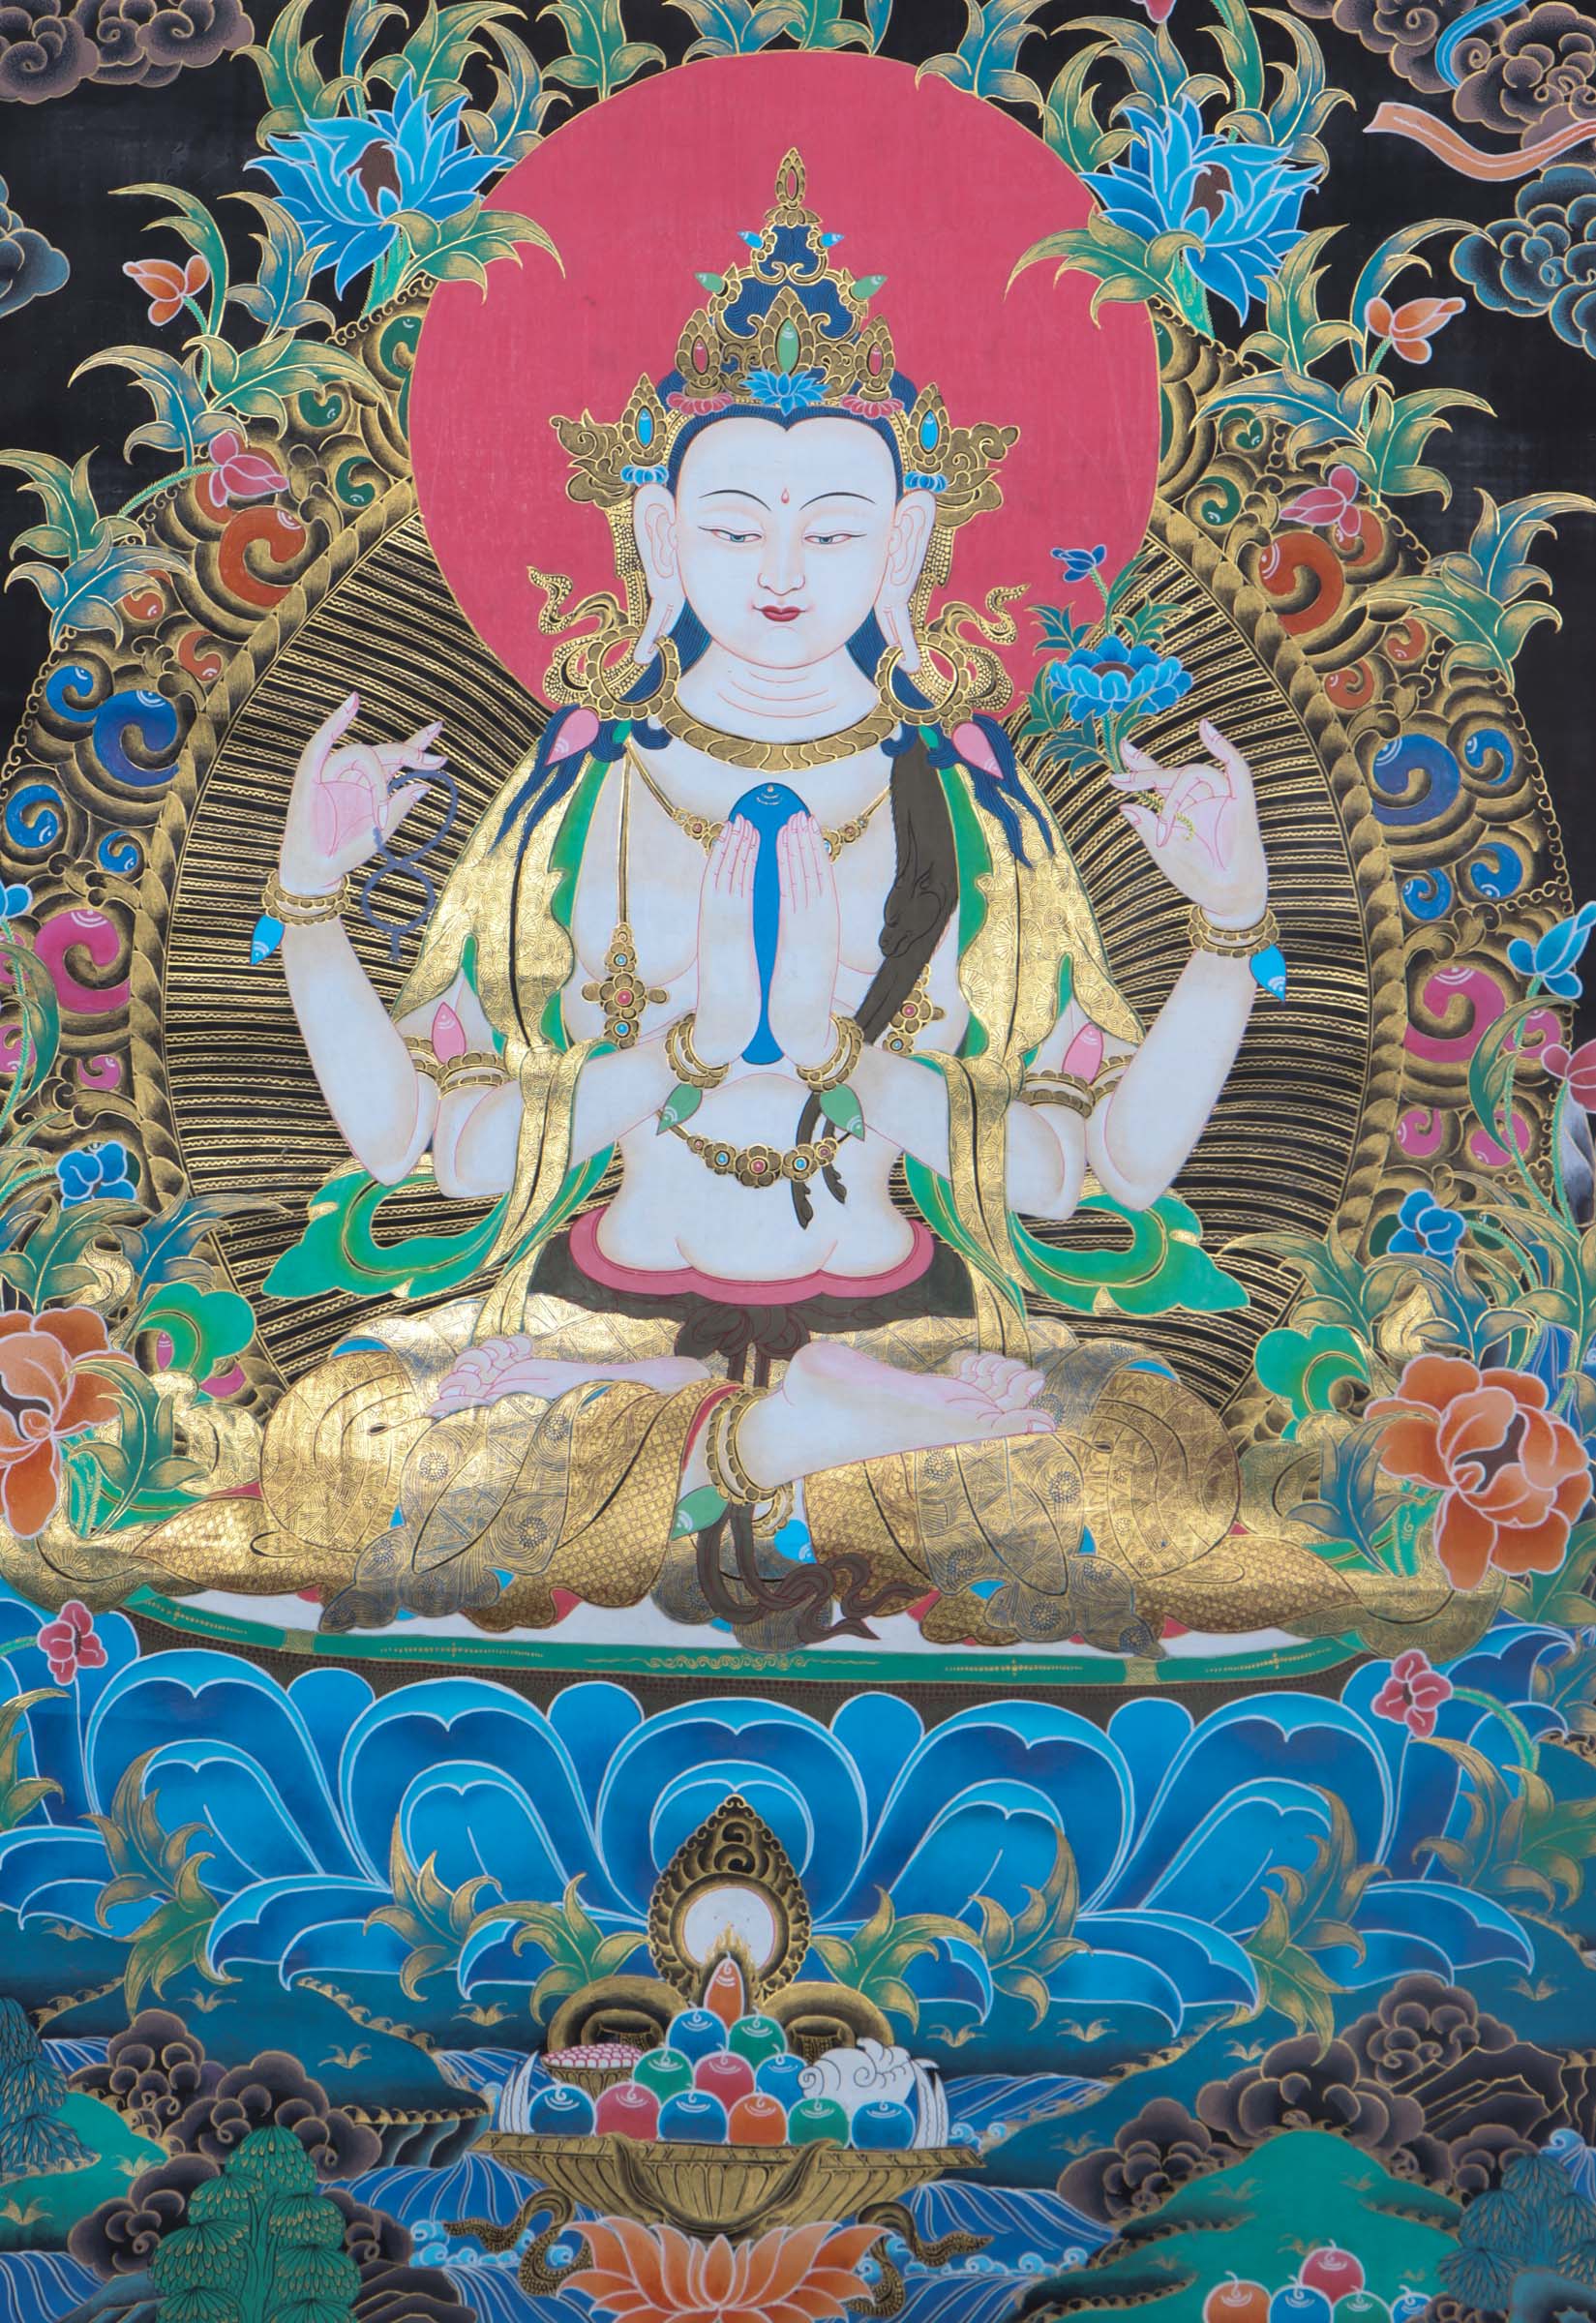 Four Arm Chenrezig Bodhisattva thangka painting depicts the Buddhist deity with multiple arms, each holding symbolic objects representing compassion and wisdom. The vibrant colors and intricate details of the thangka invite the viewer to meditate on the embodiment of enlightenment and seek inner peace.